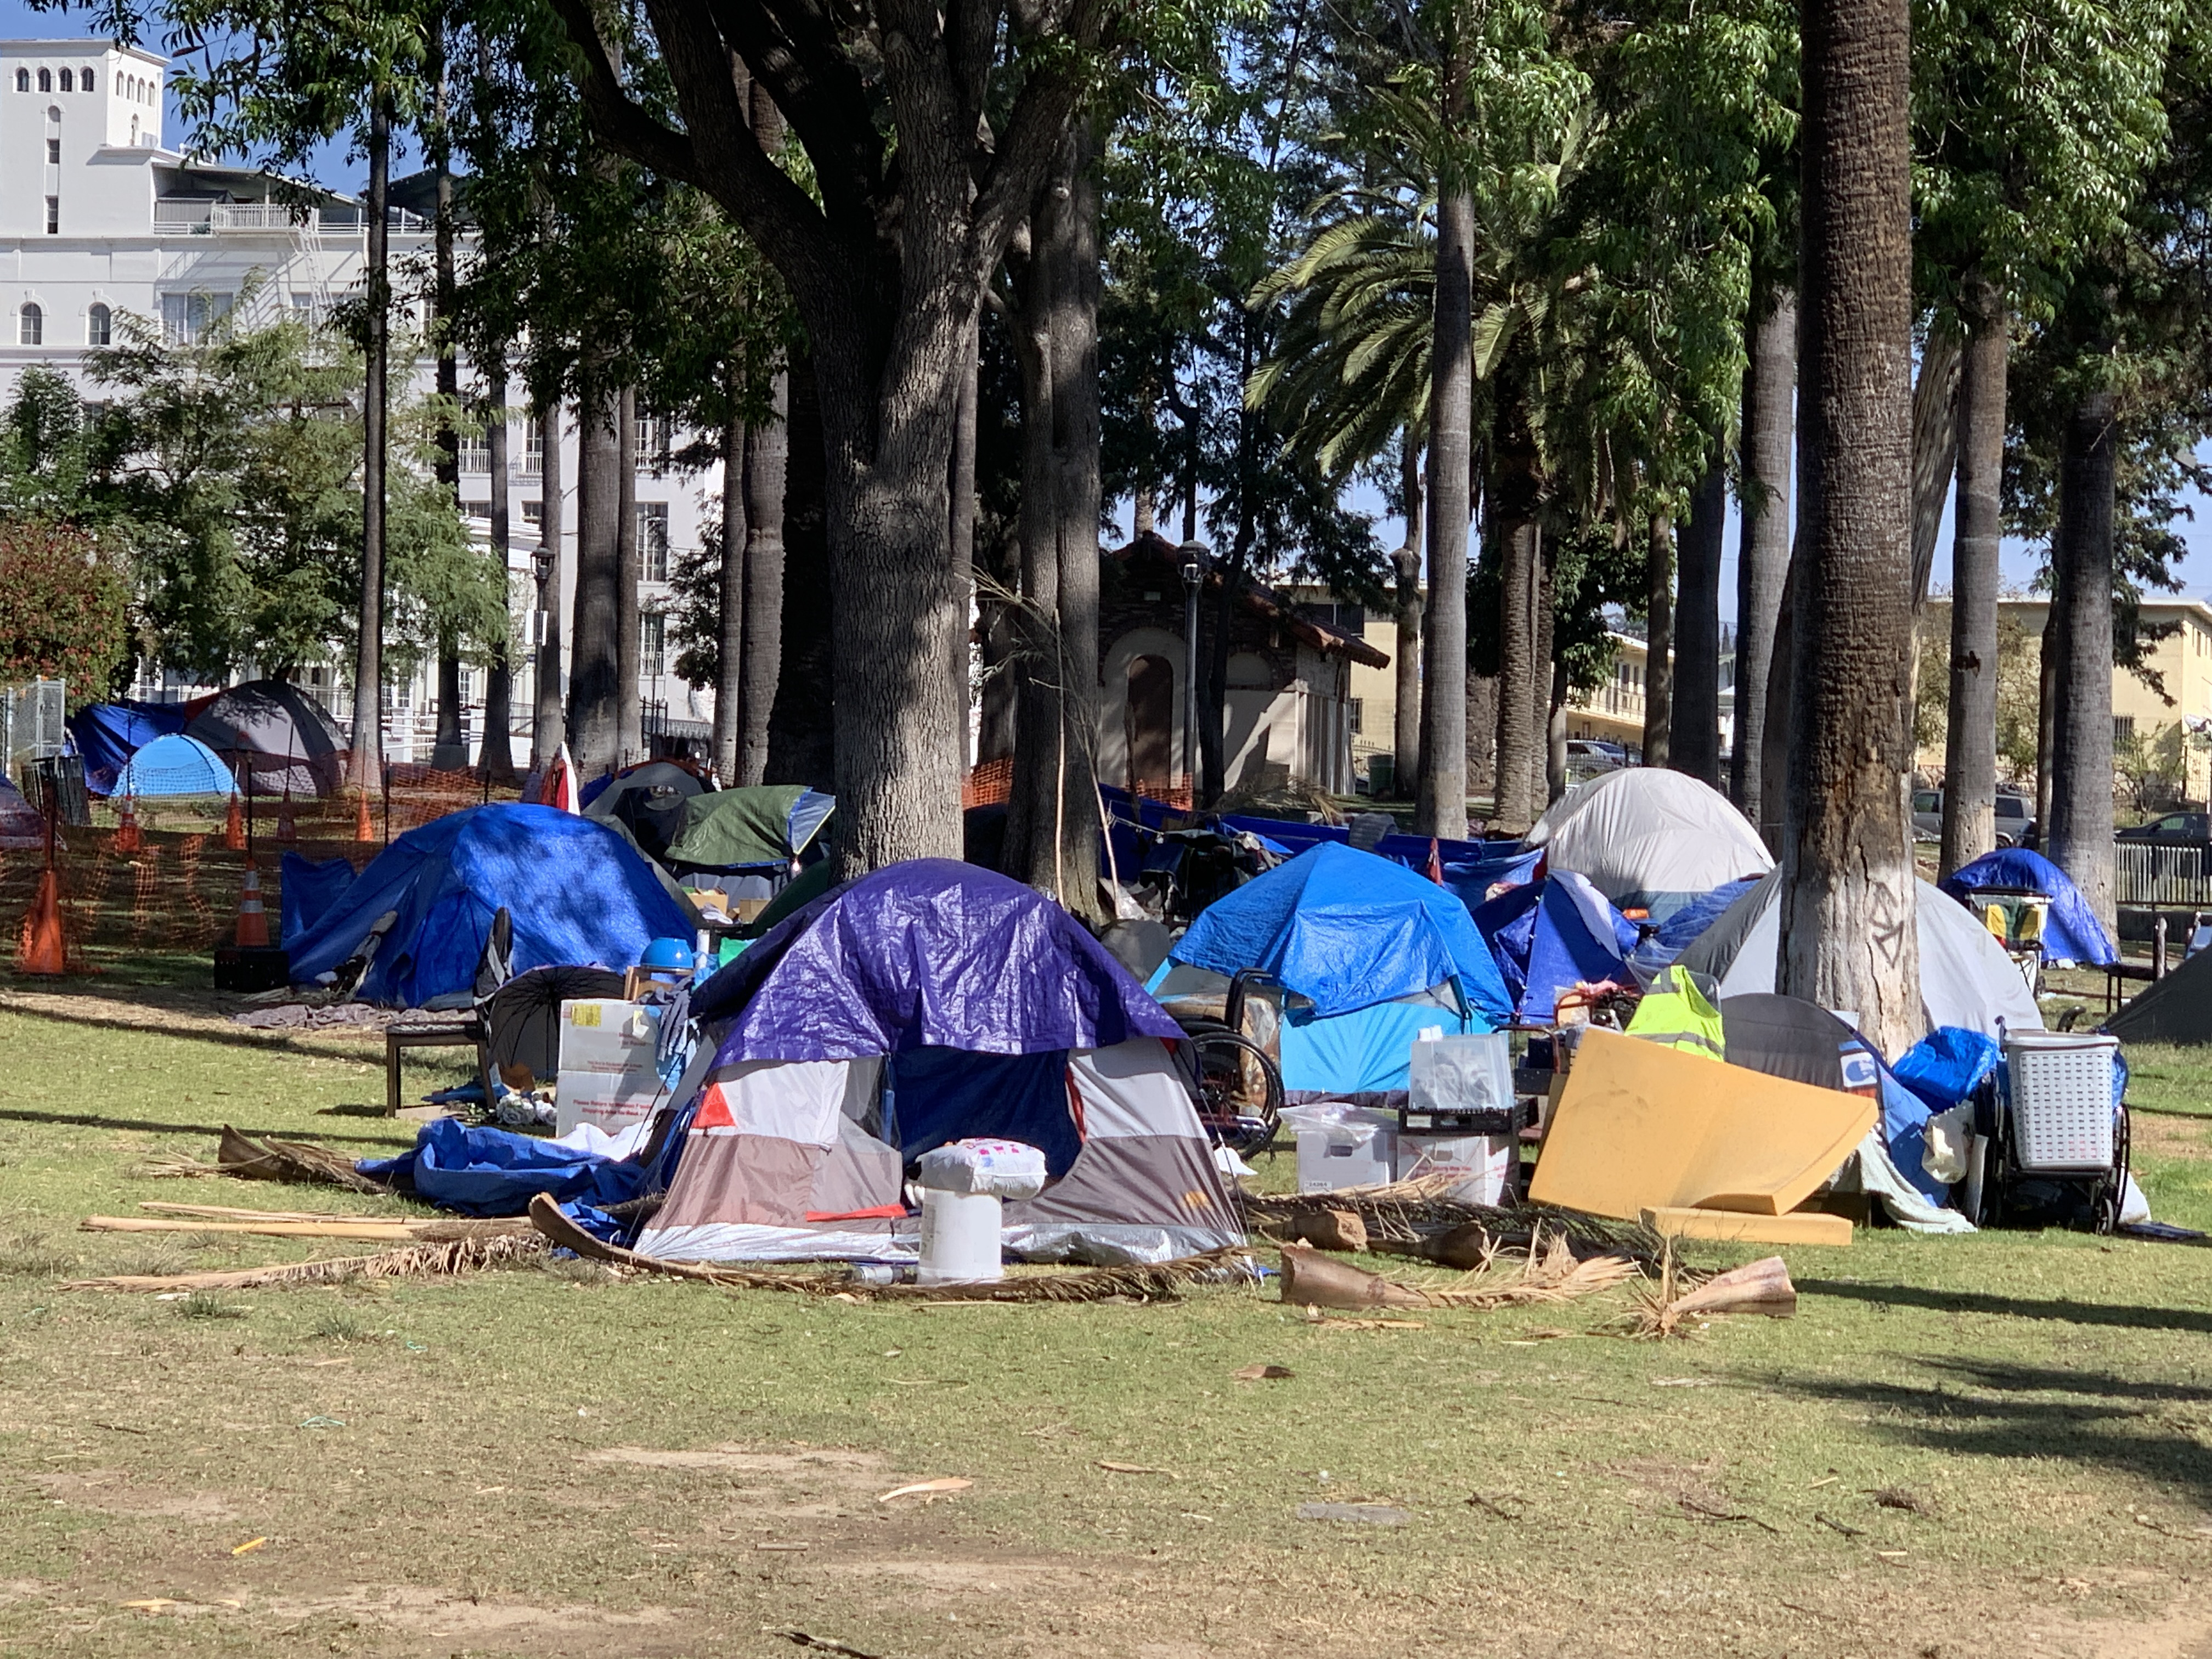 An encampment in Los Angeles (Getty Images/iStockphoto)